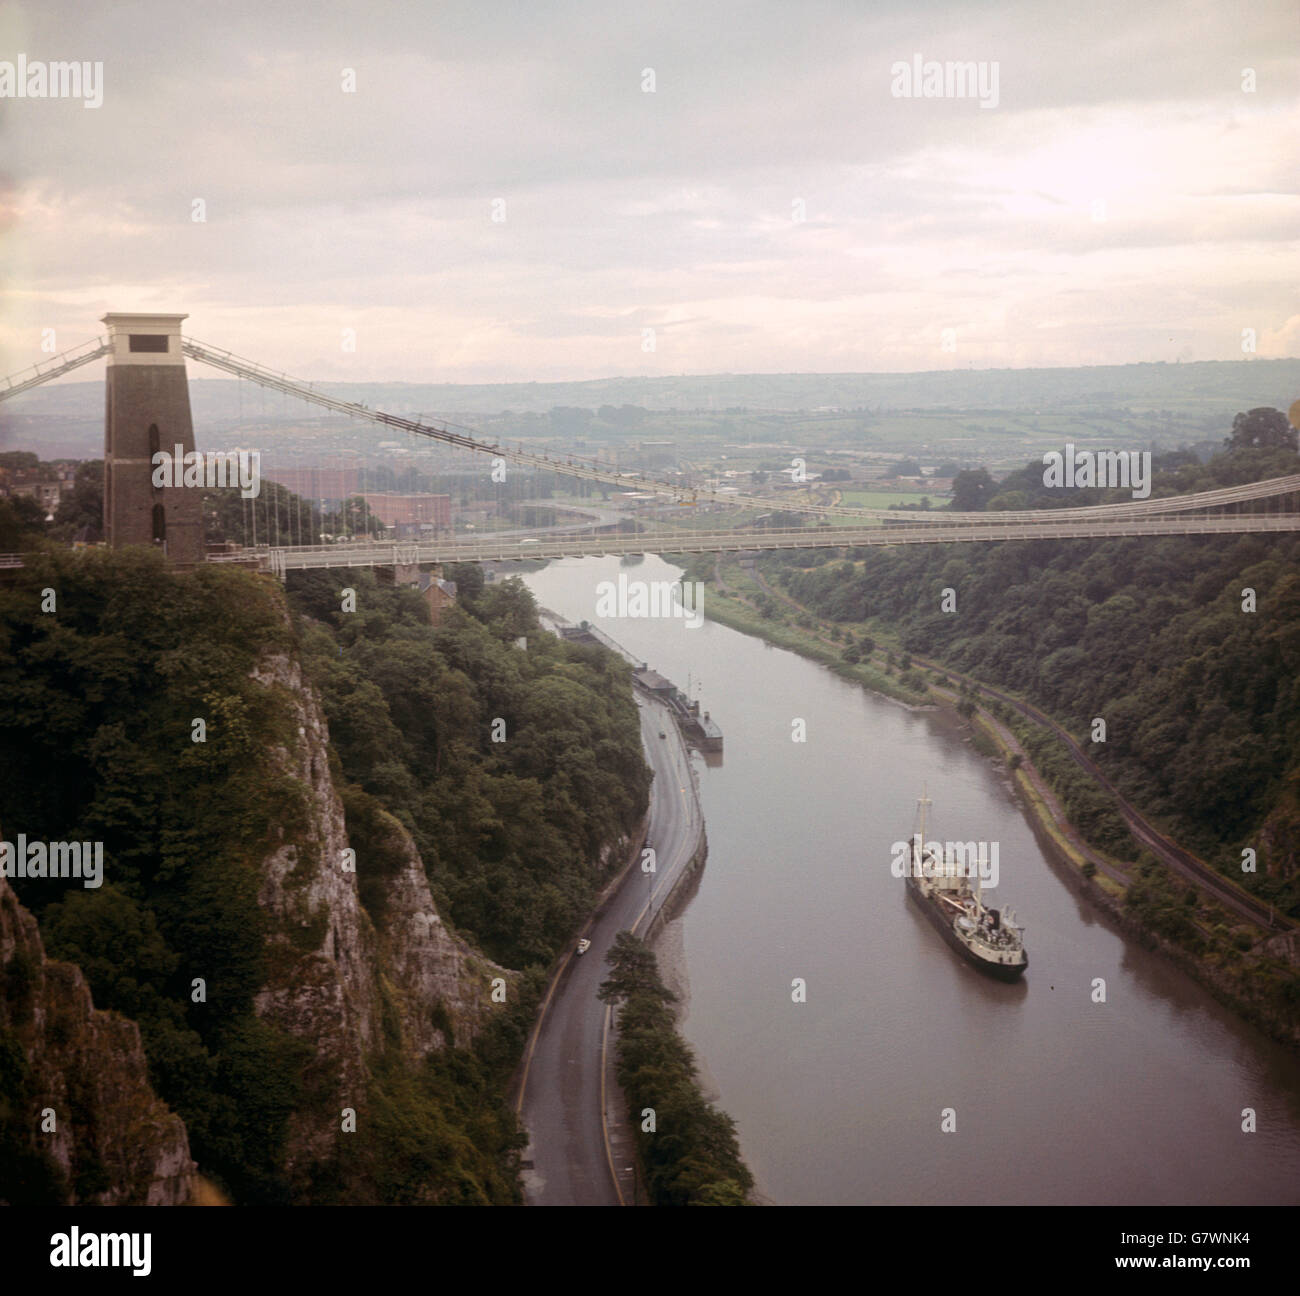 Buildings and Landmarks - Clifton Suspension Bridge - Bristol. A boat passes under the 245ft high Clifton Suspension bridge over the Avon Gorge near Bristol. Stock Photo